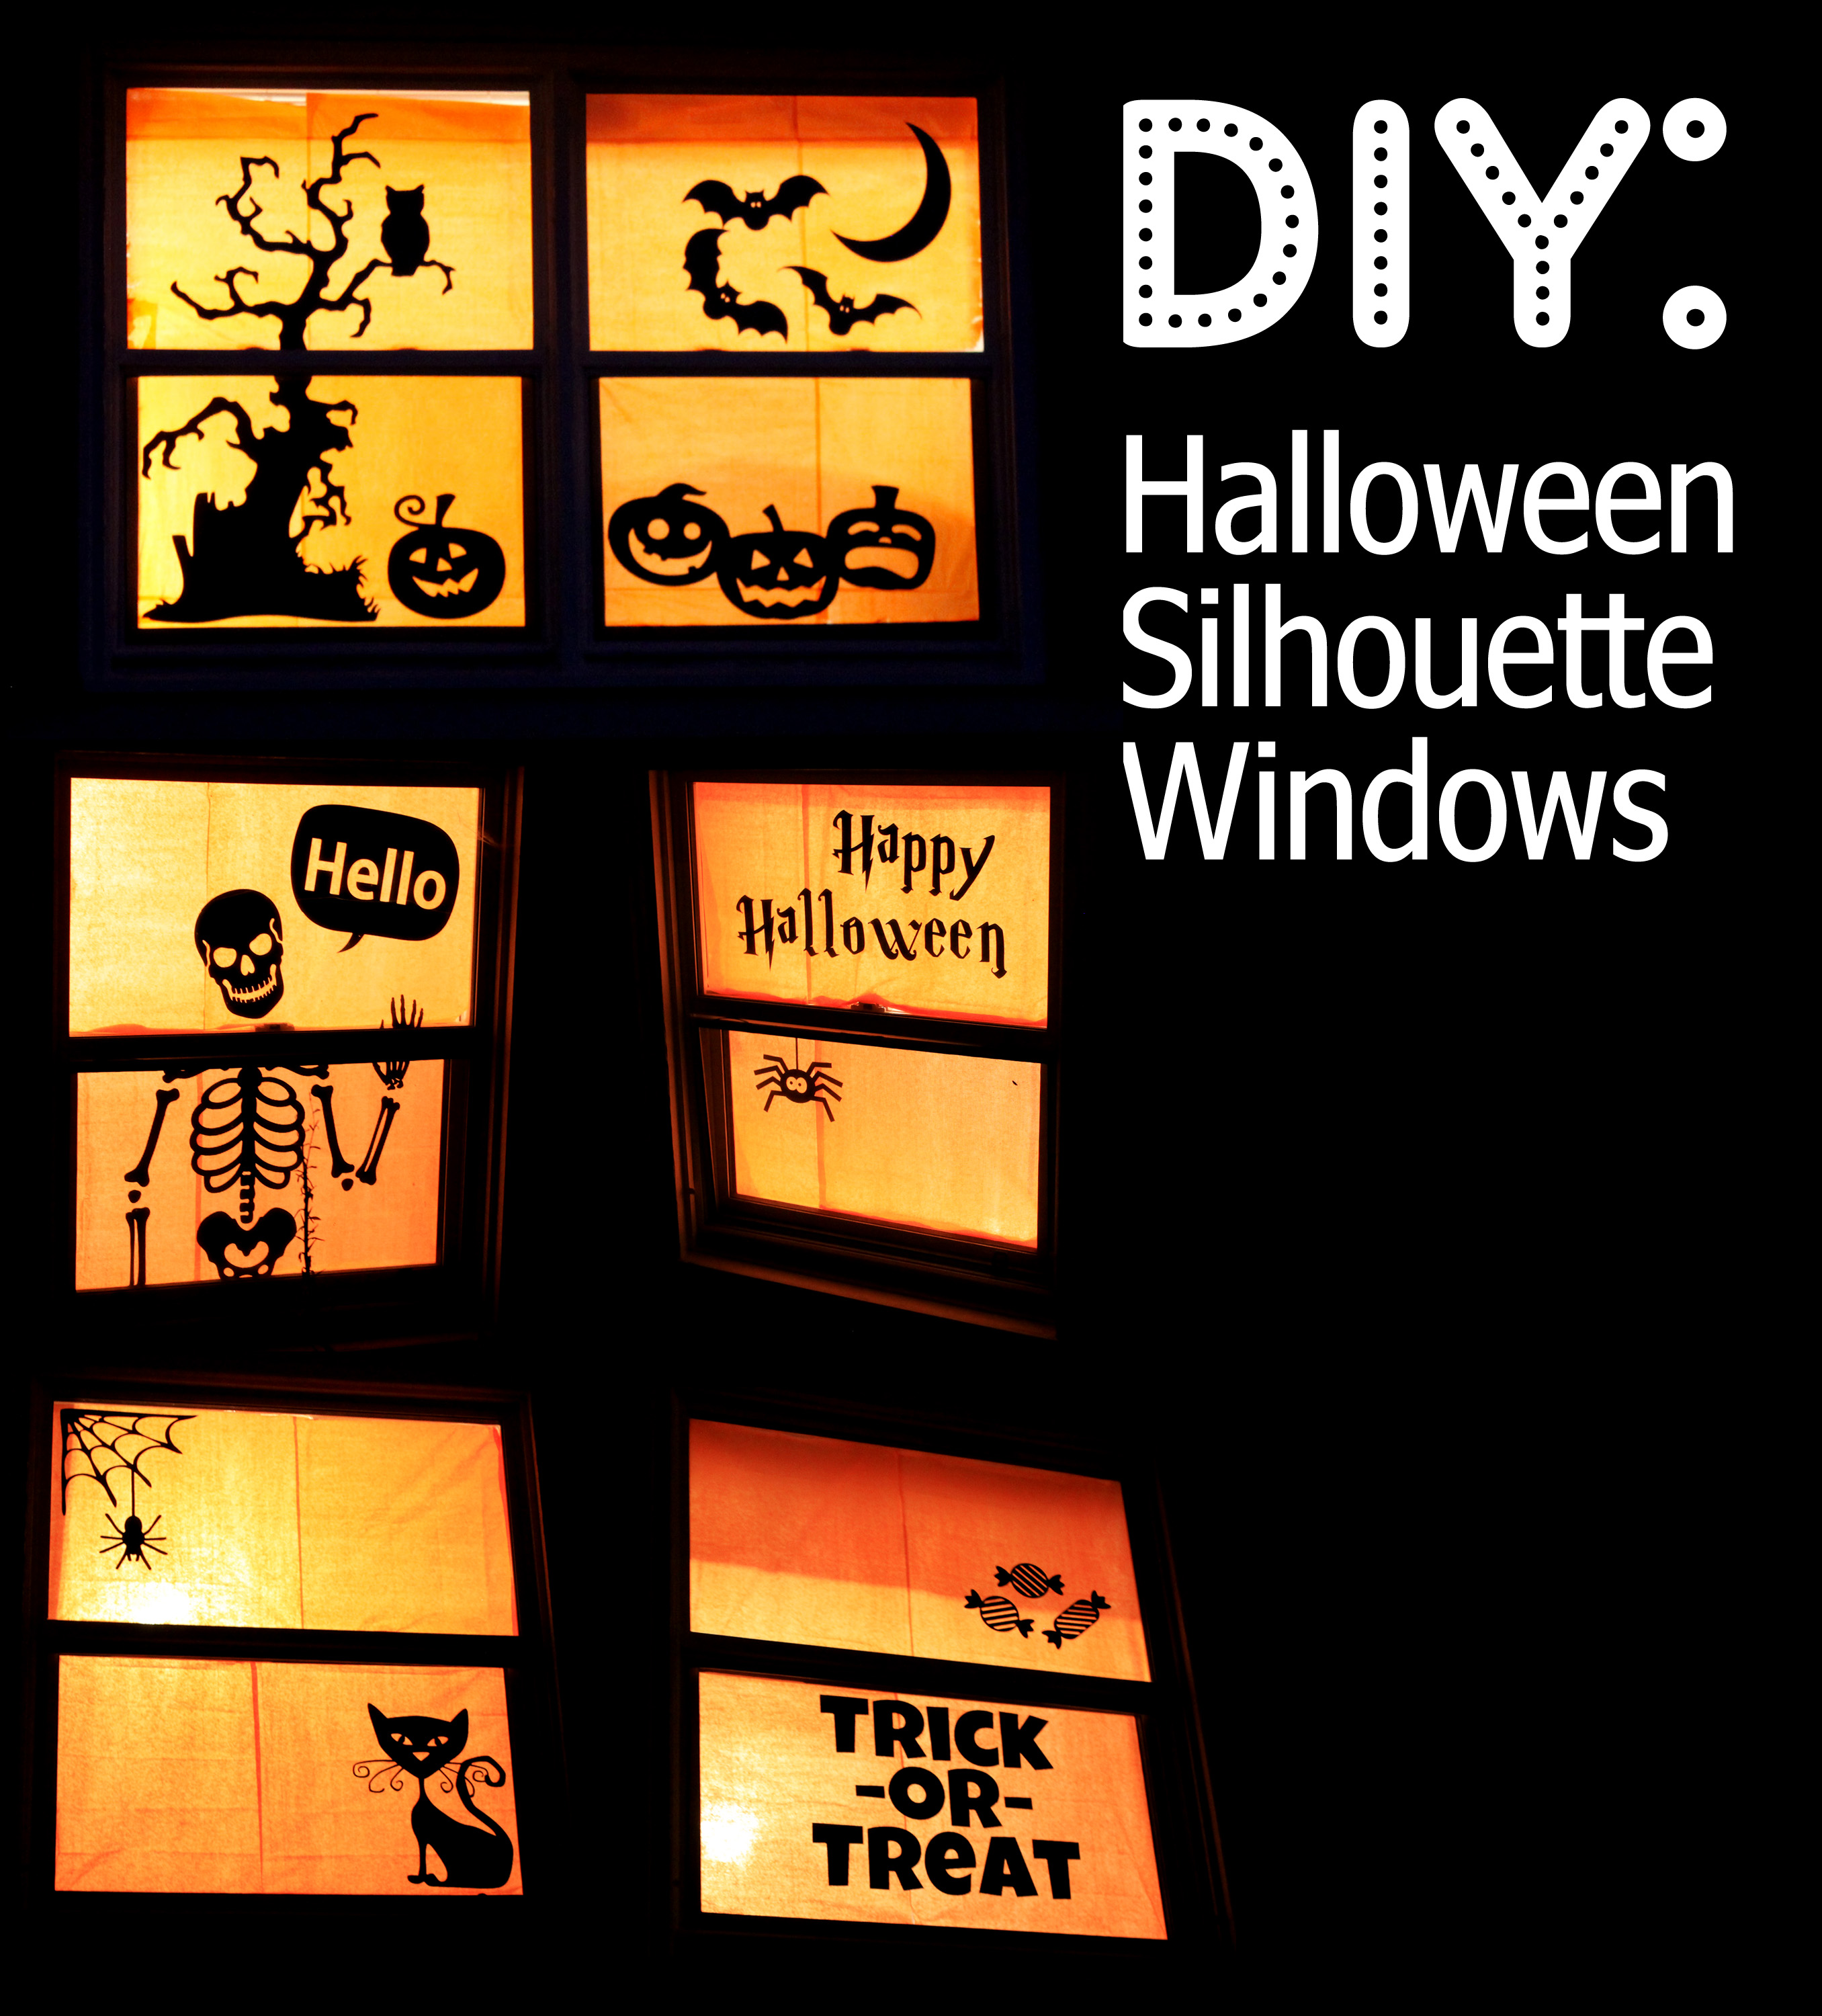 Top 10 halloween window decorations To Give Your Home a Festive Look